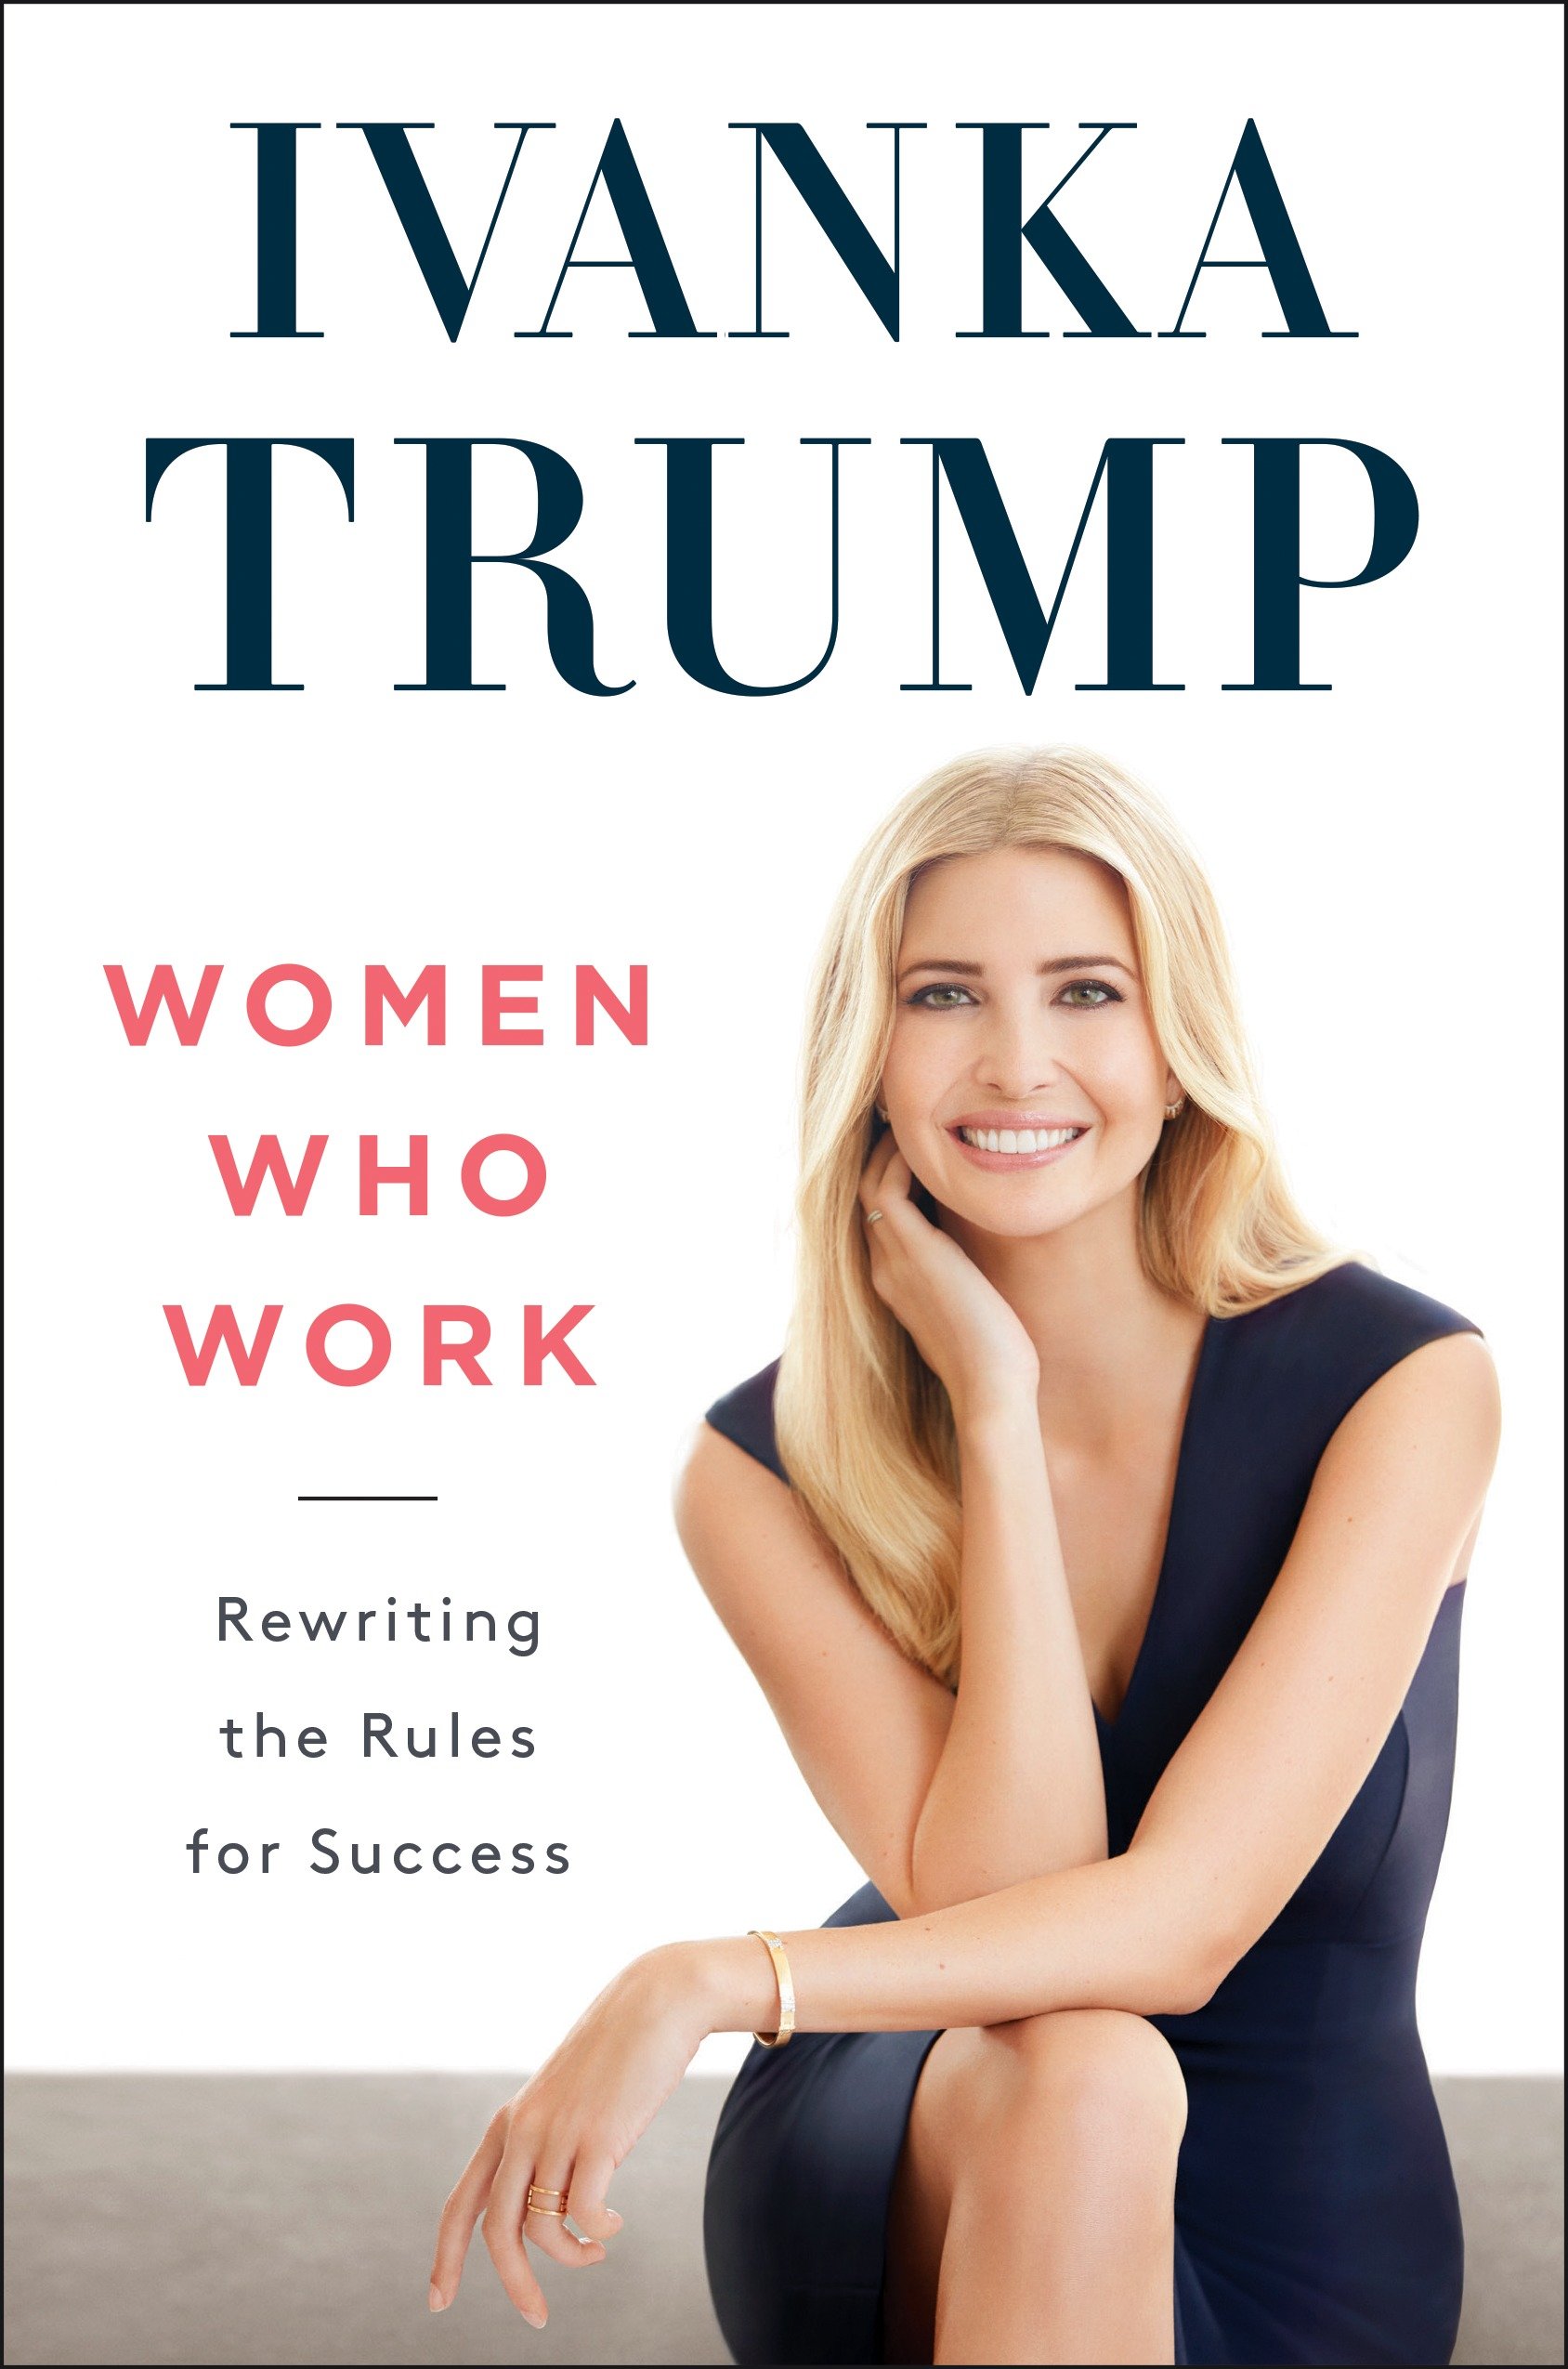 Women who work rewriting the rules for success cover image